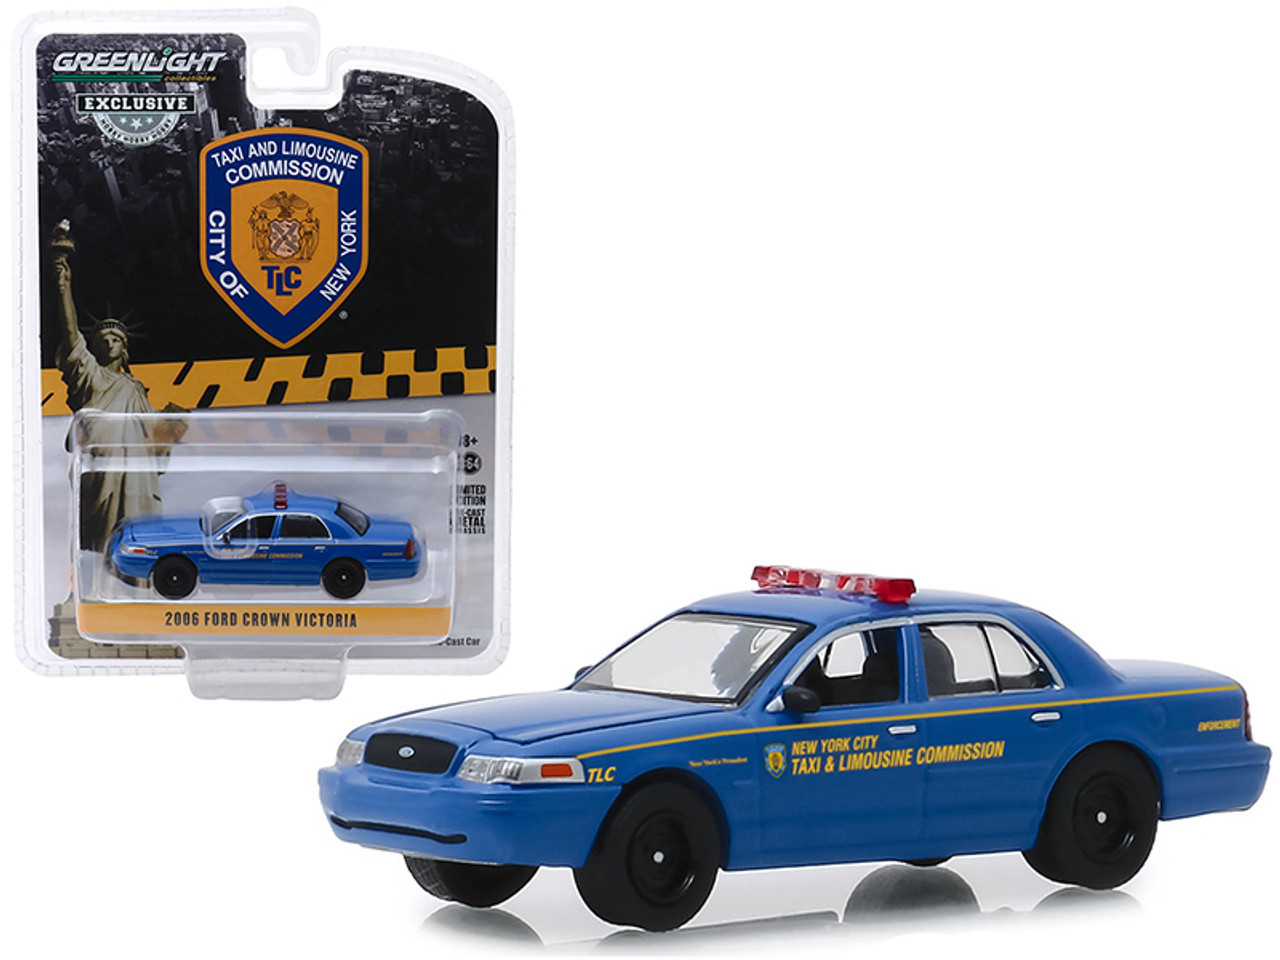 2006 Ford Crown Victoria "New York City Taxi and Limousine Commission" ("TLC") Blue "Hobby Exclusive" 1/64 Diecast Model Car by Greenlight